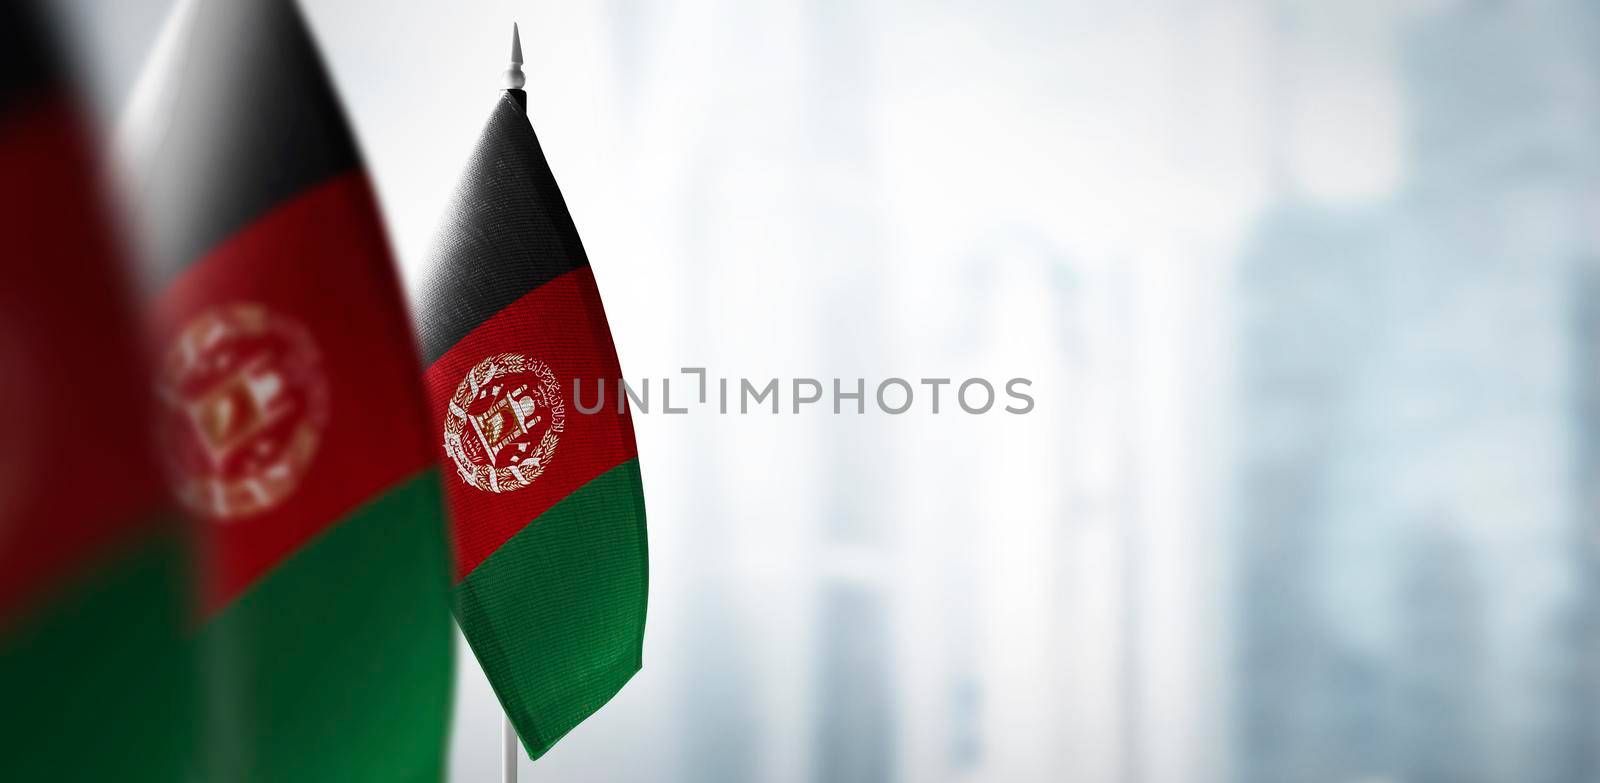 Small flags of Afghanistan on a blurry background of the city.